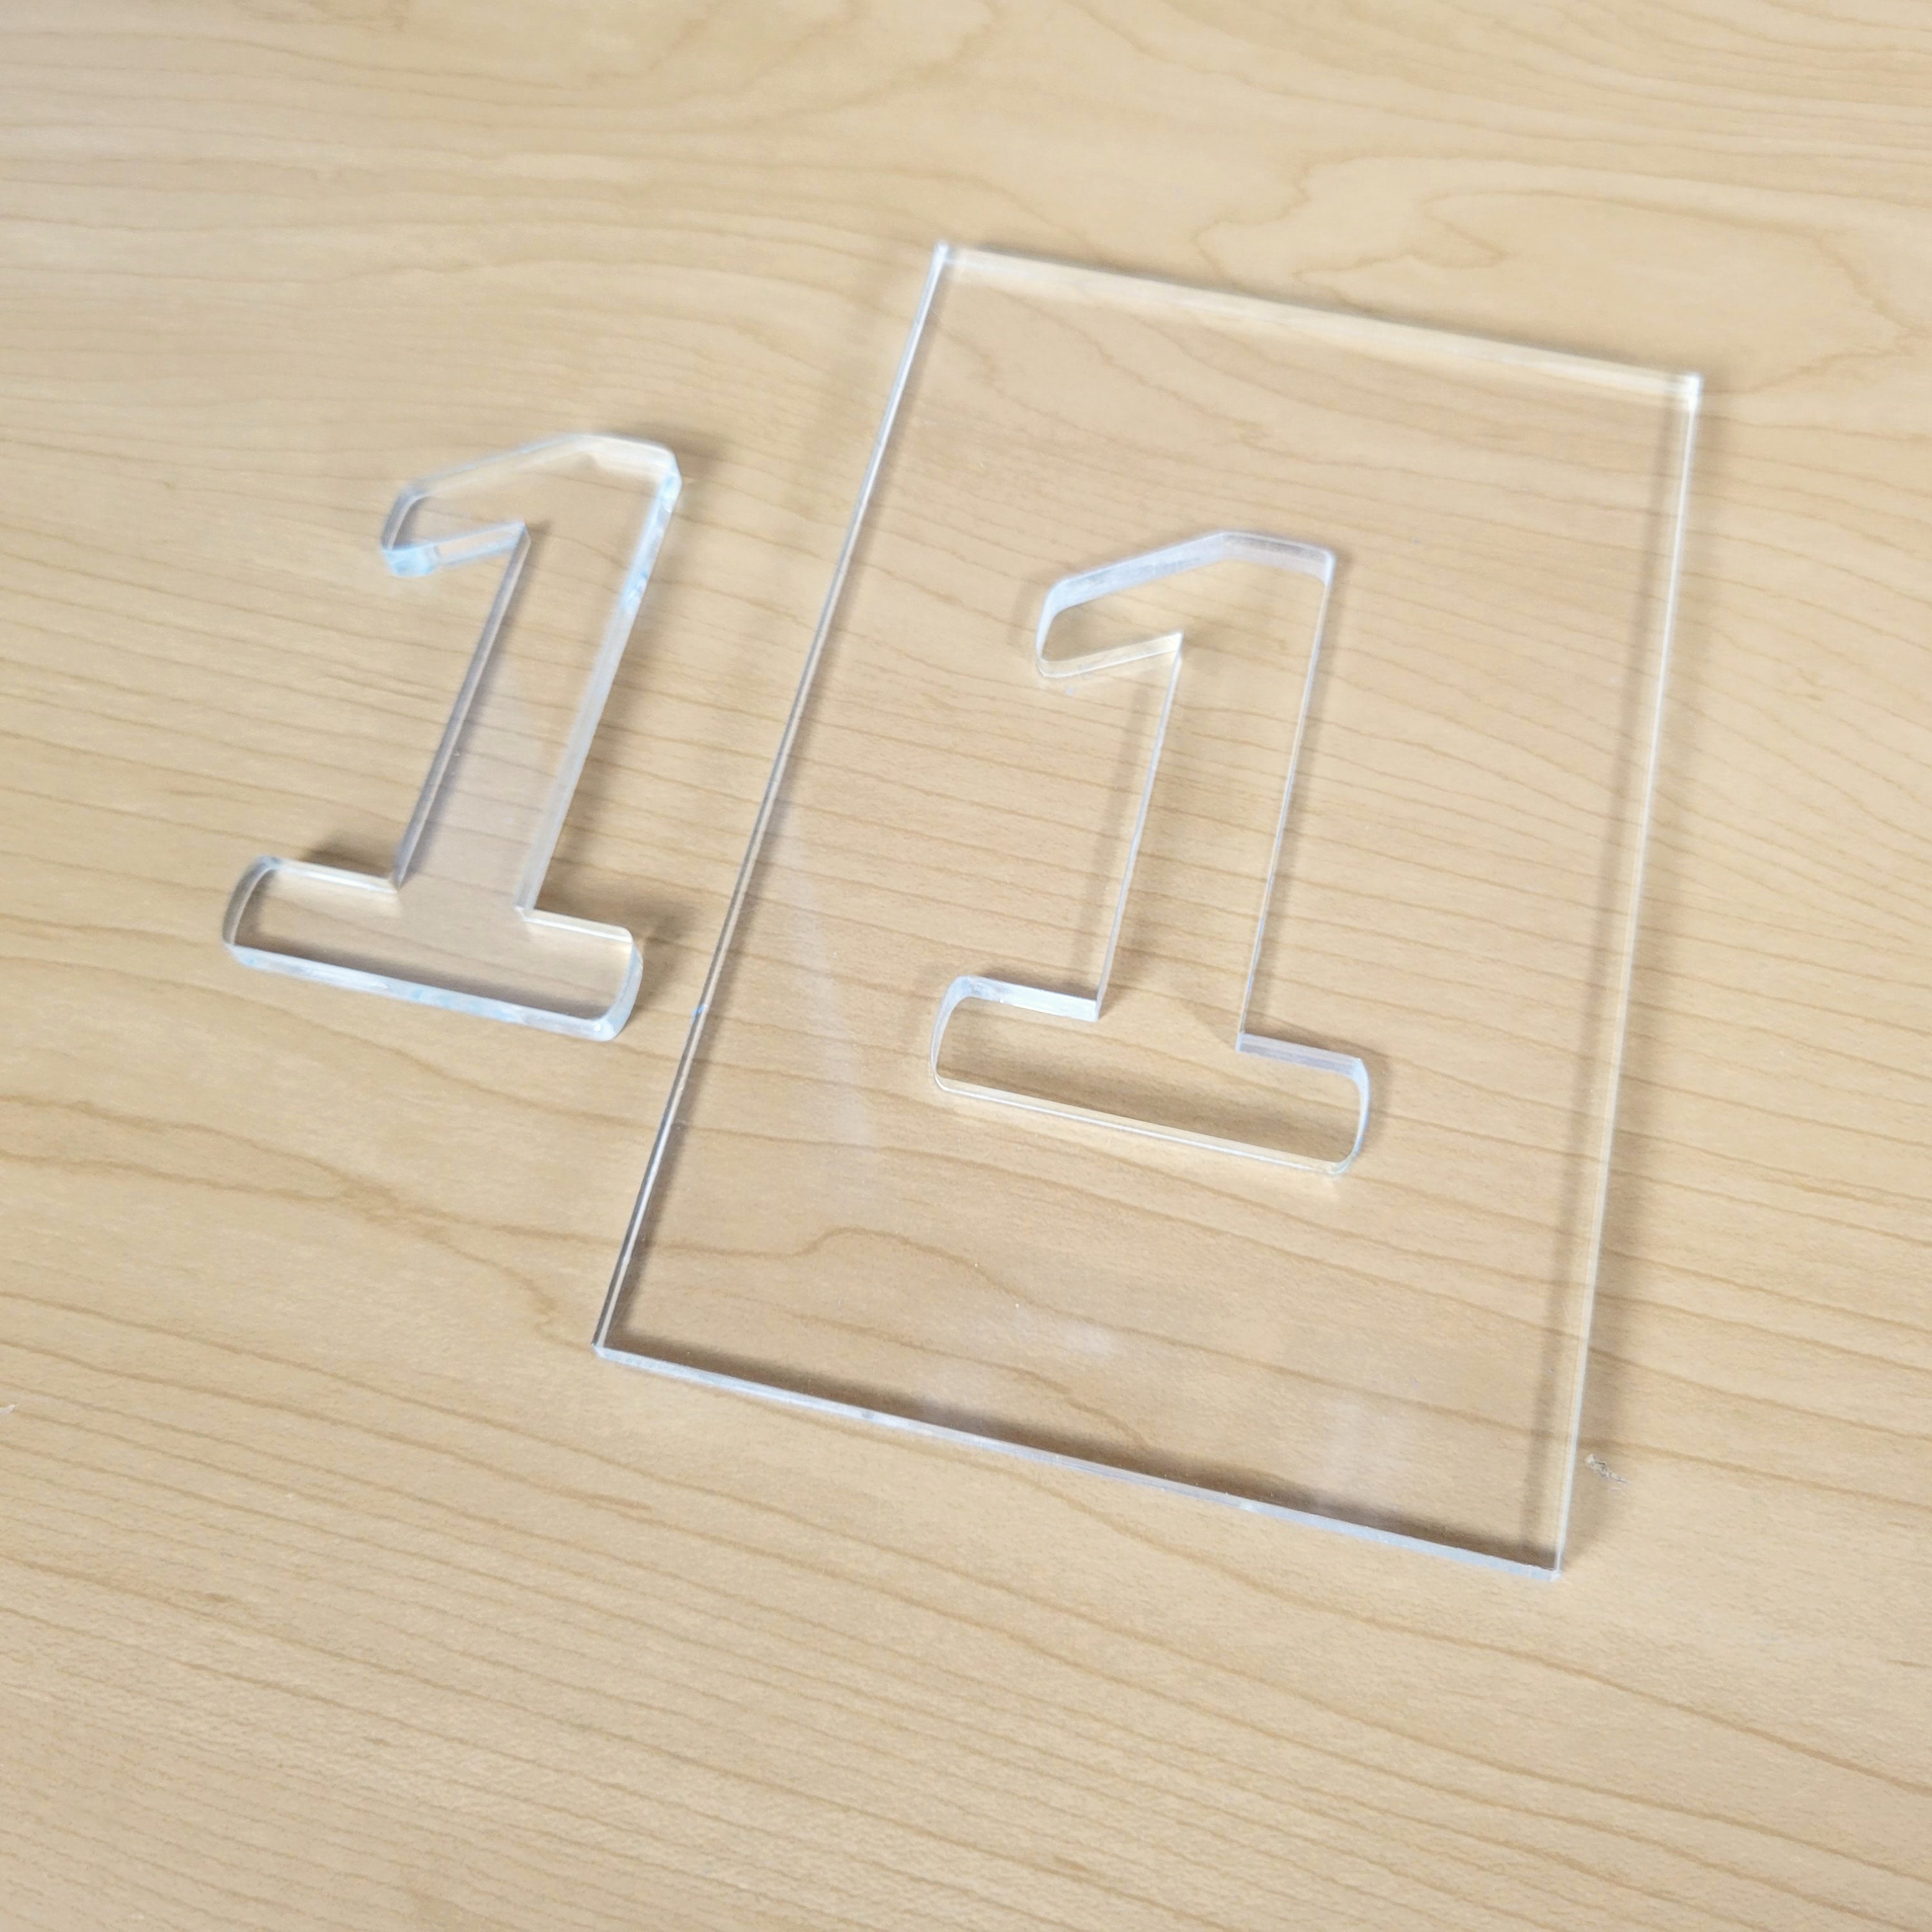 Routing Letter Set - Multi-Layer Inlay System